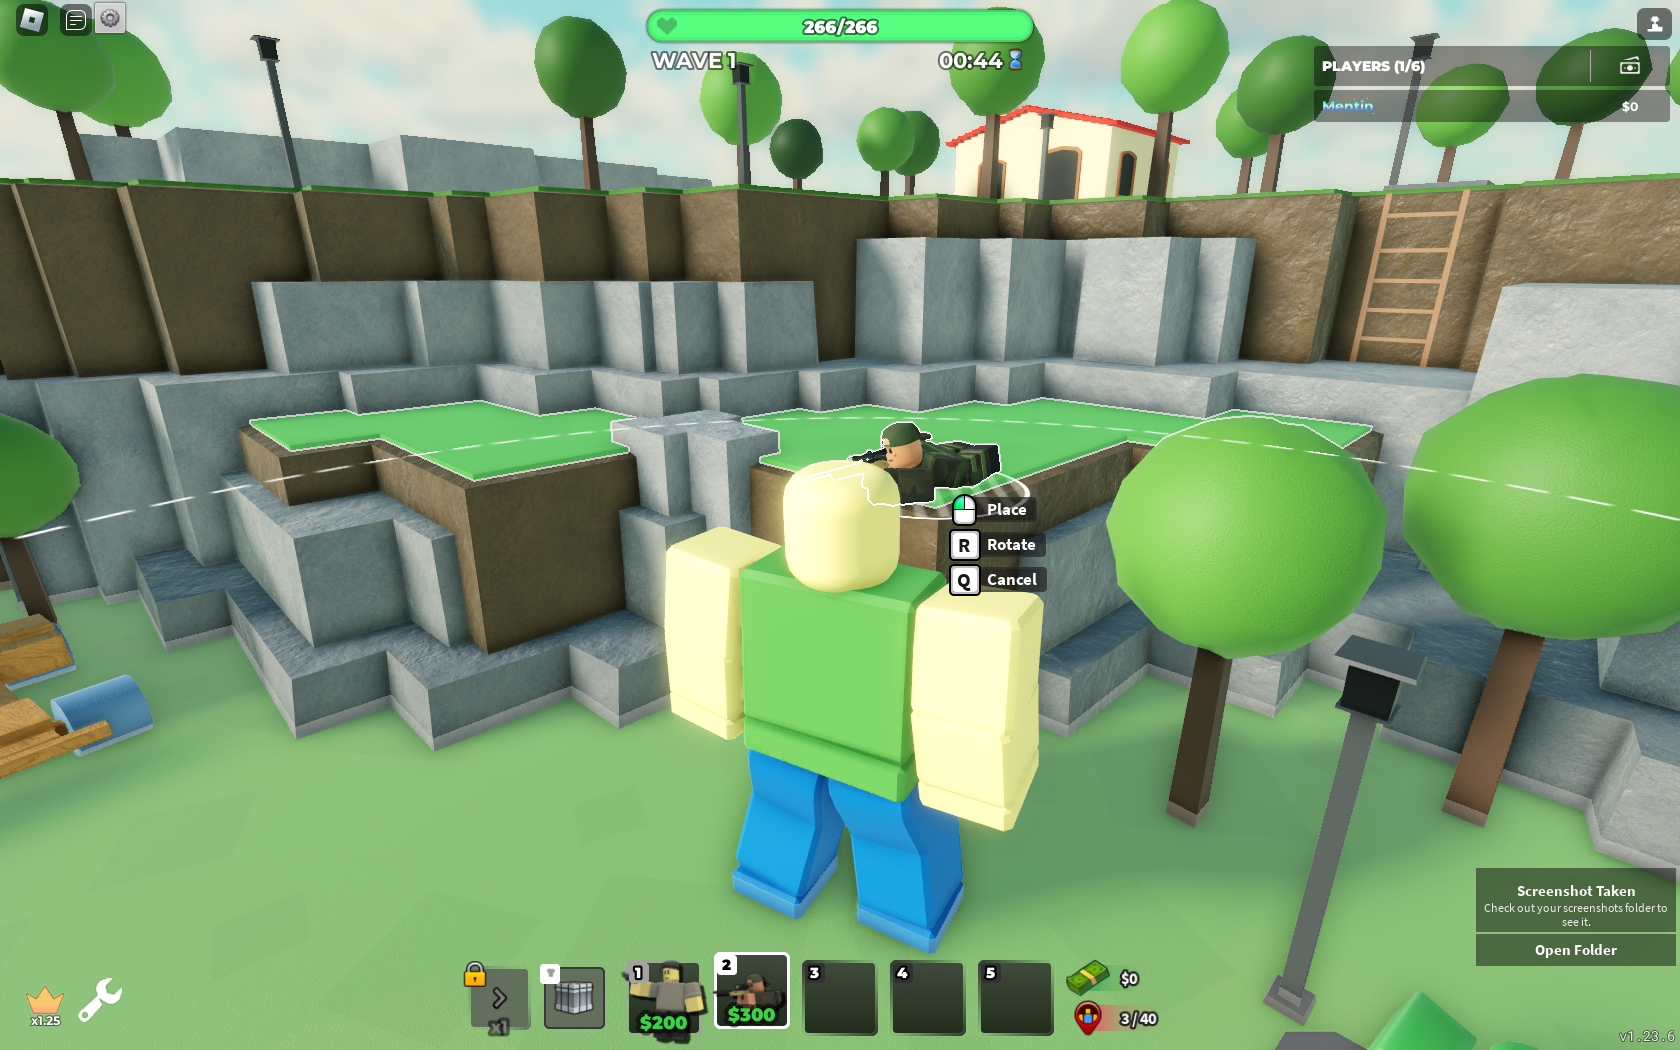 Scripters of this sub can somebody help with this? I tried to make a tower  defense game : r/roblox